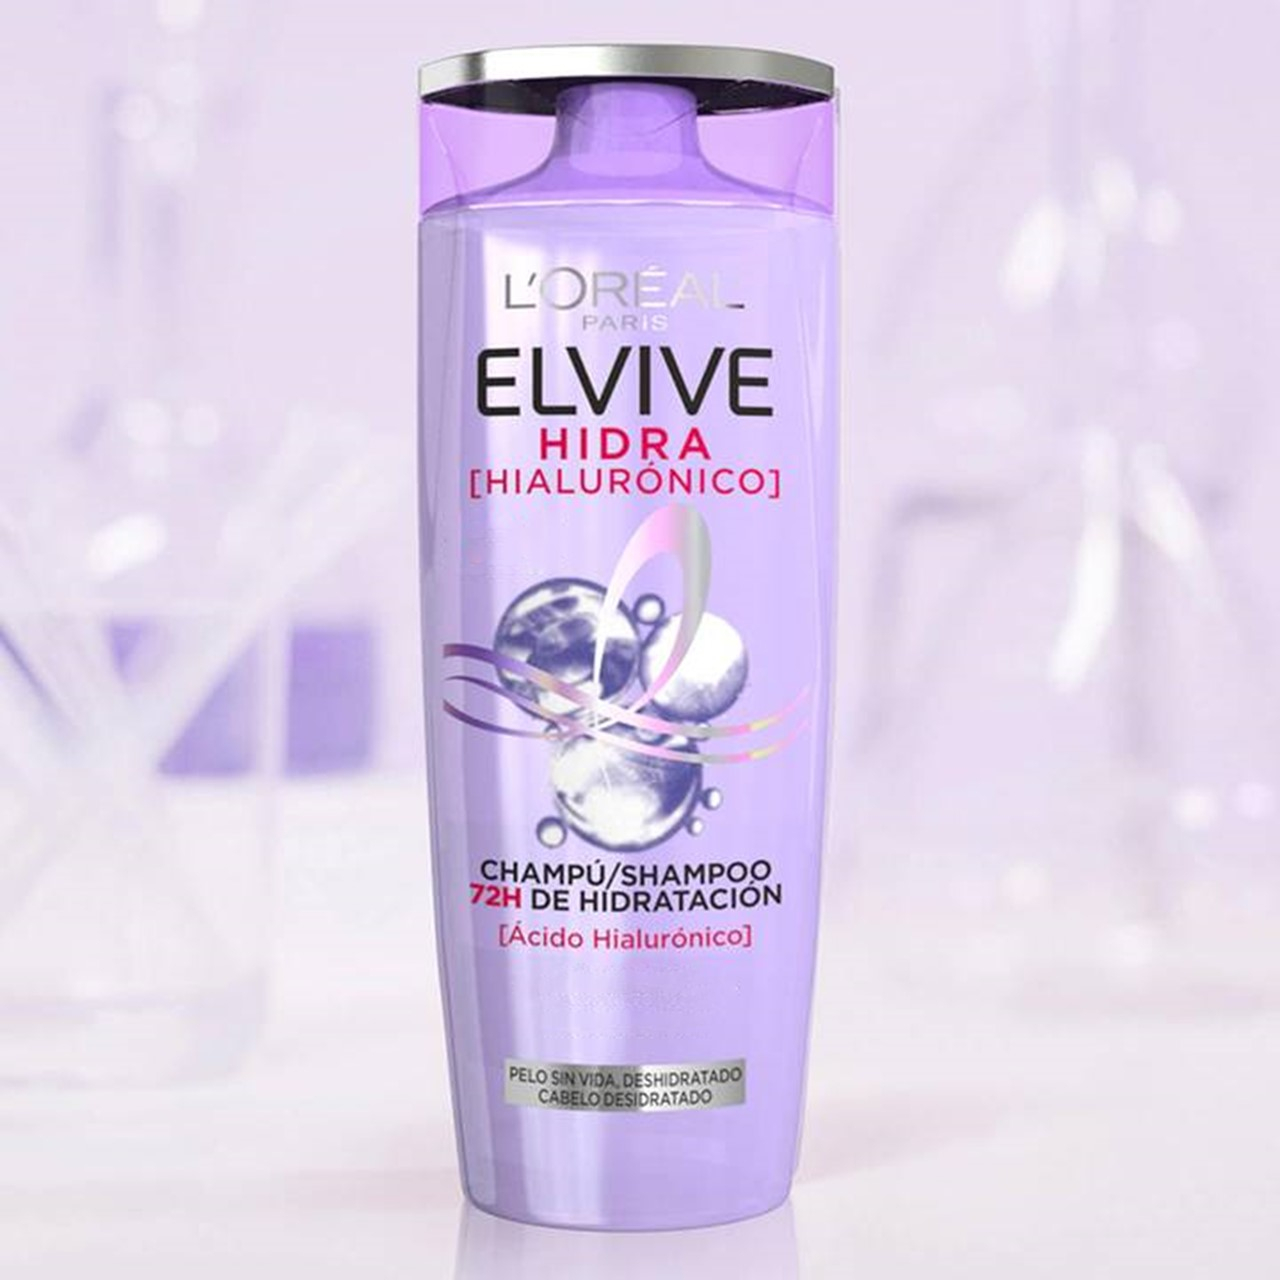 Elvive Hyaluronic Pure Shampoo and Conditioner x 400 ml-4 PCS